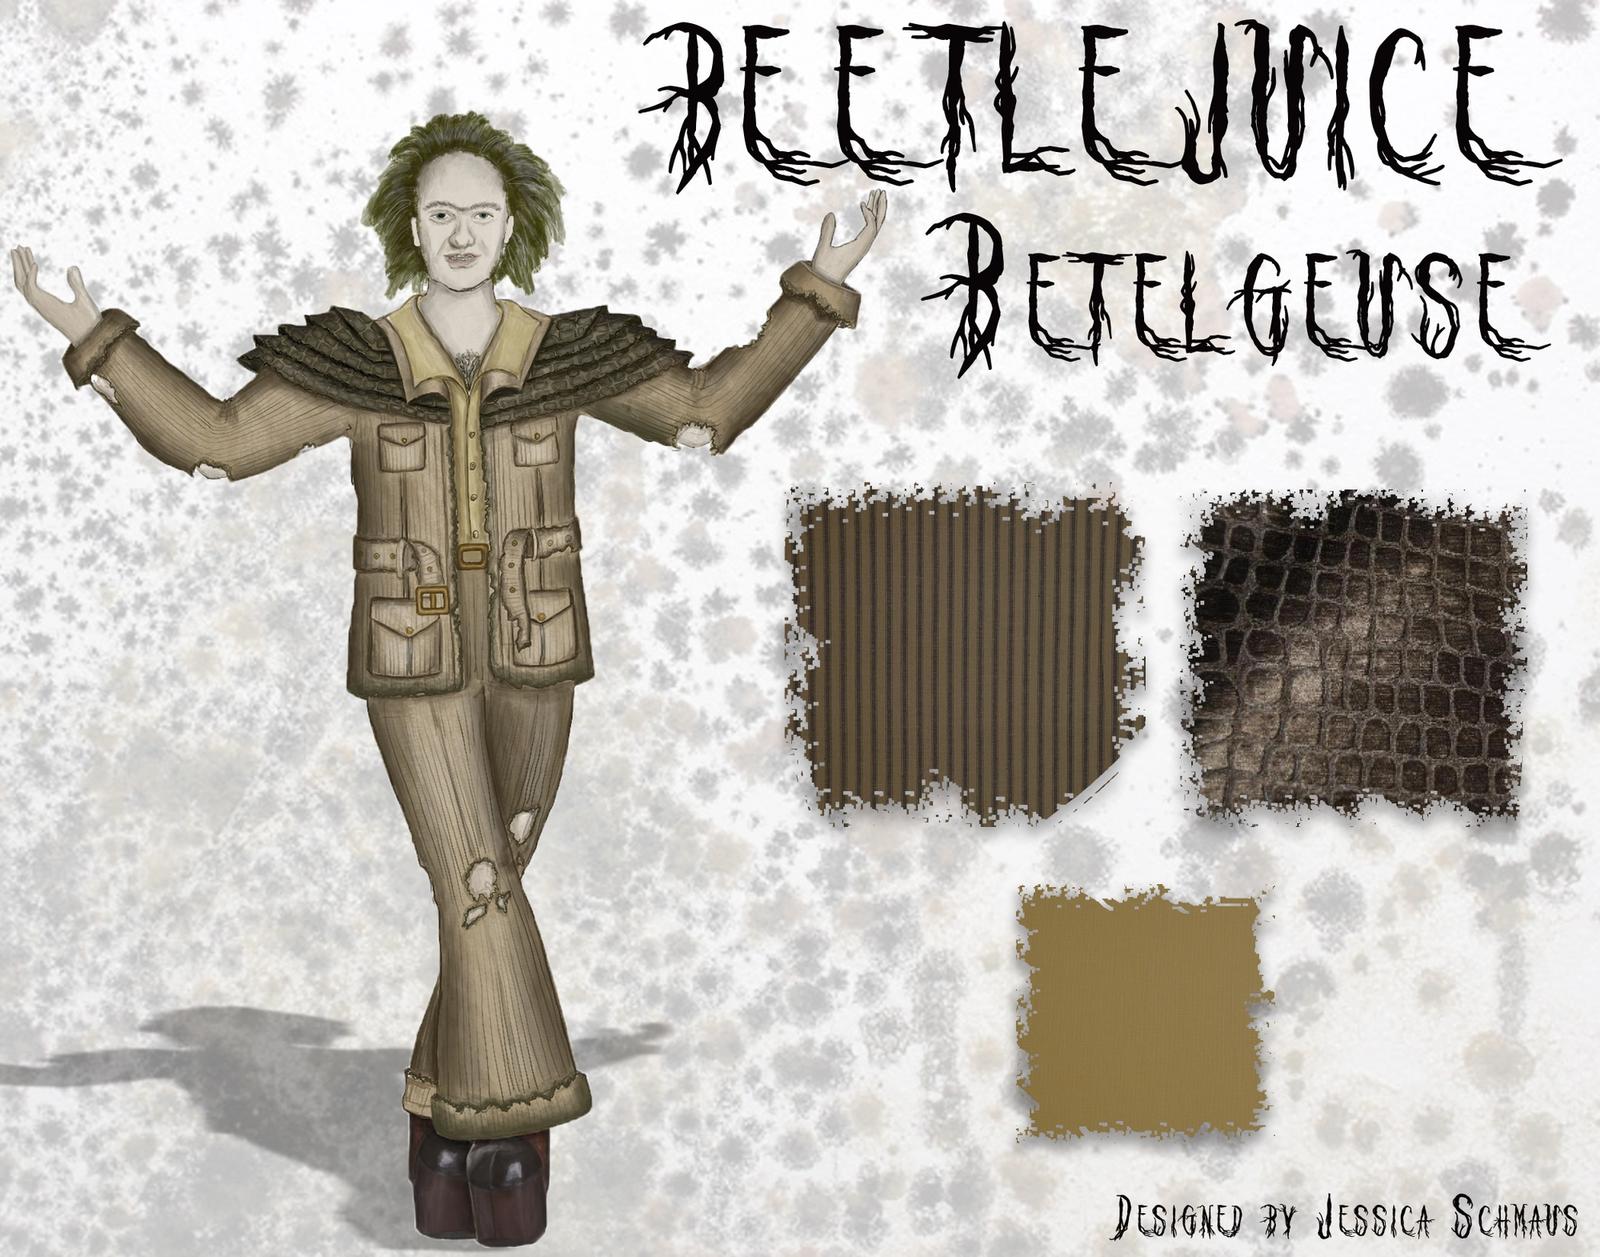 A redesigned look for Betelgeuse.